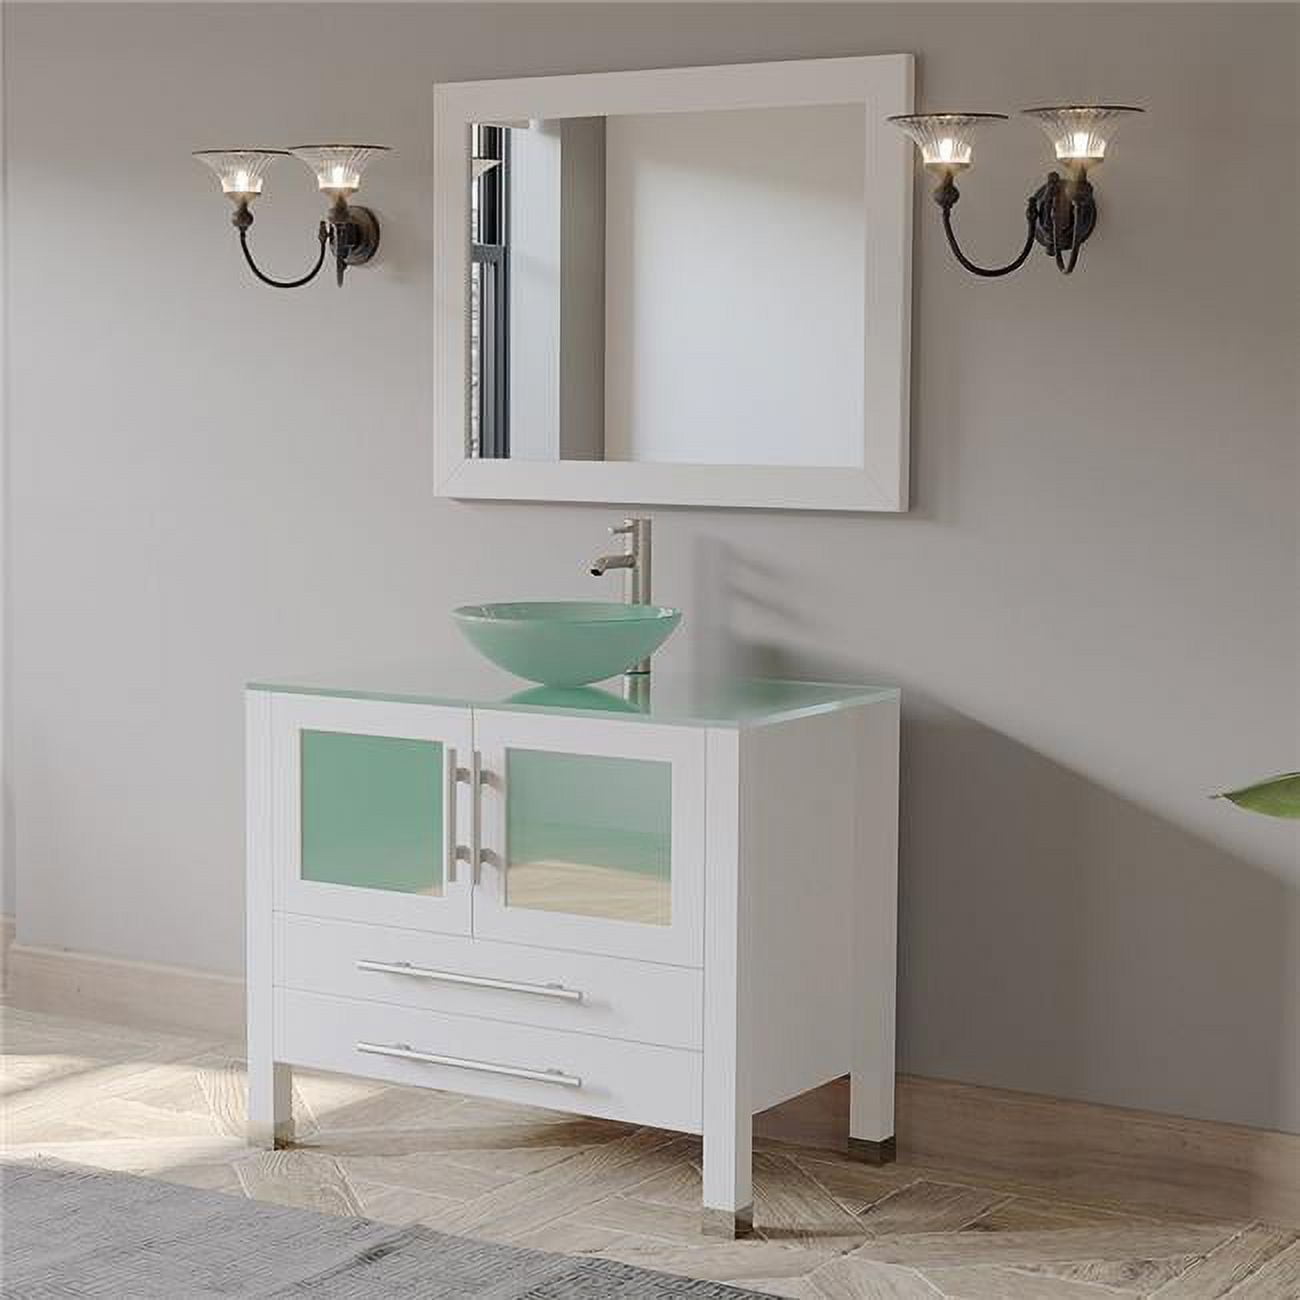 Picture of Cambridge Plumbing 8111BW-BN 36 in. White Solid Wood & Glass Single Vessel Sink Vanity Set with Brushed Nickel Faucet & Drain